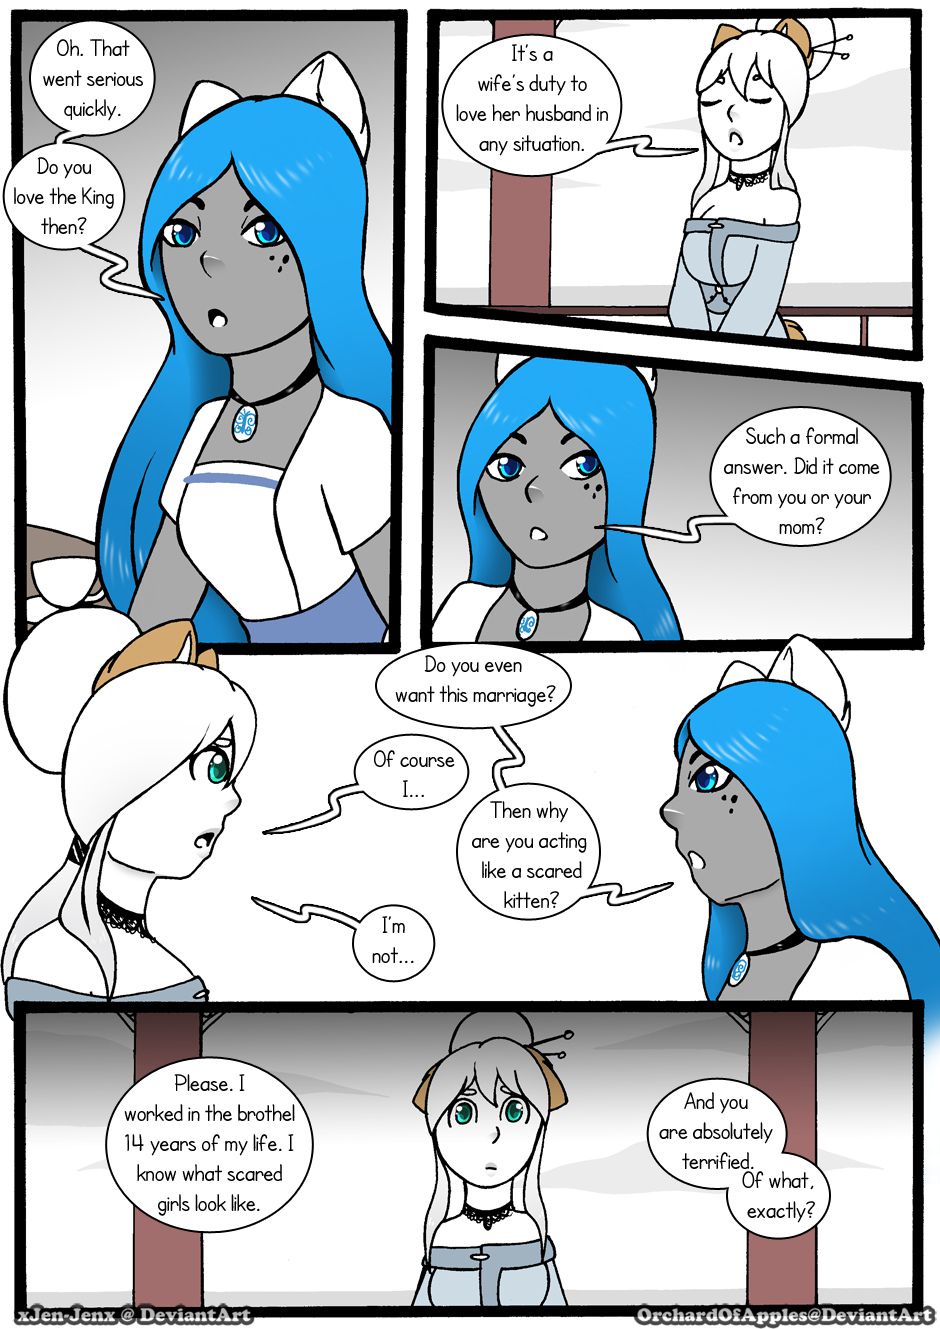 [Jeny-jen94] Between Kings and Queens [Ongoing] 213